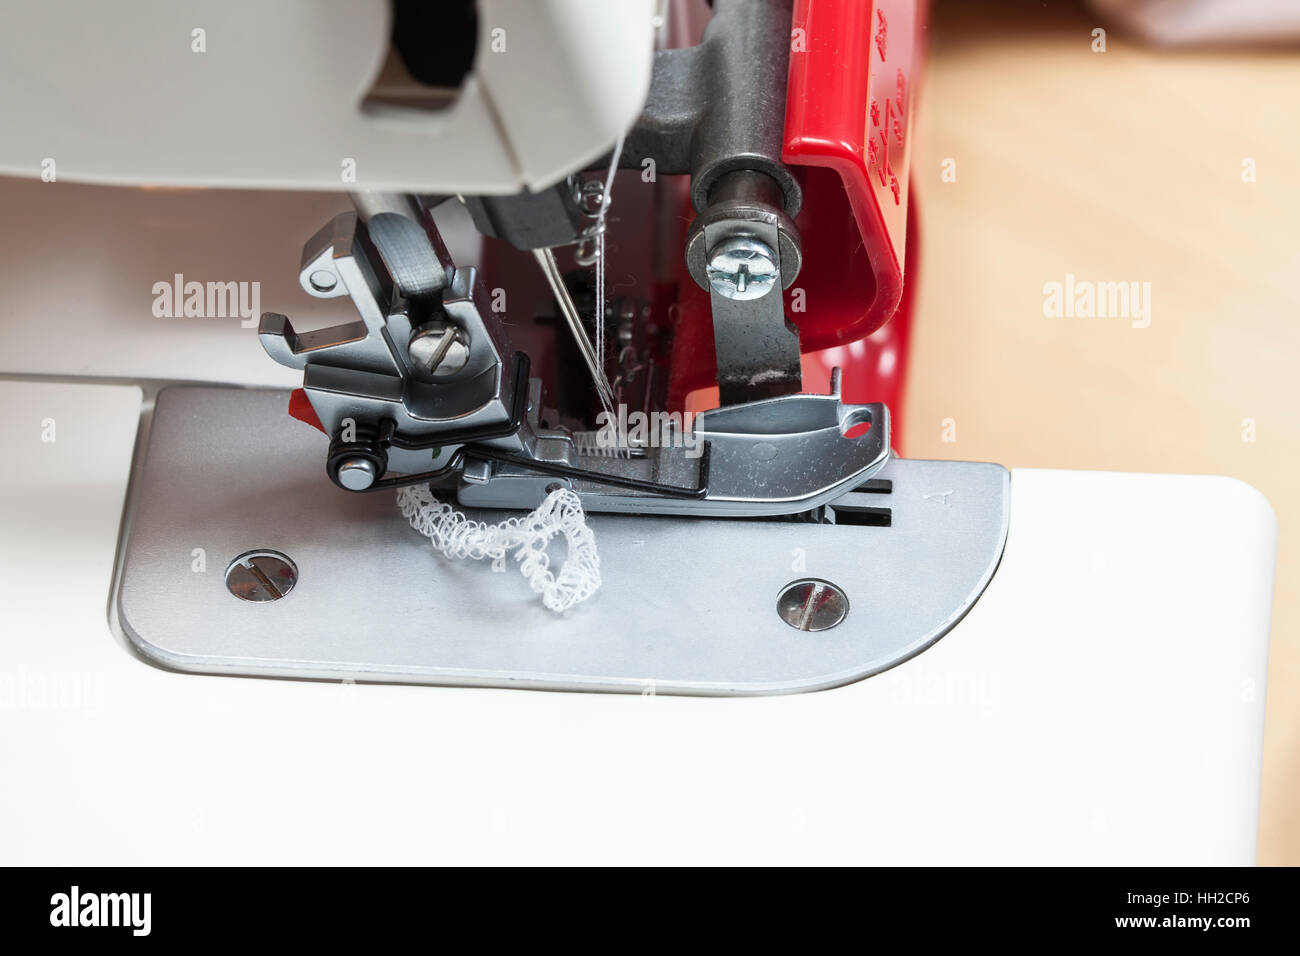 Overlock sewing machine Banque D'Images